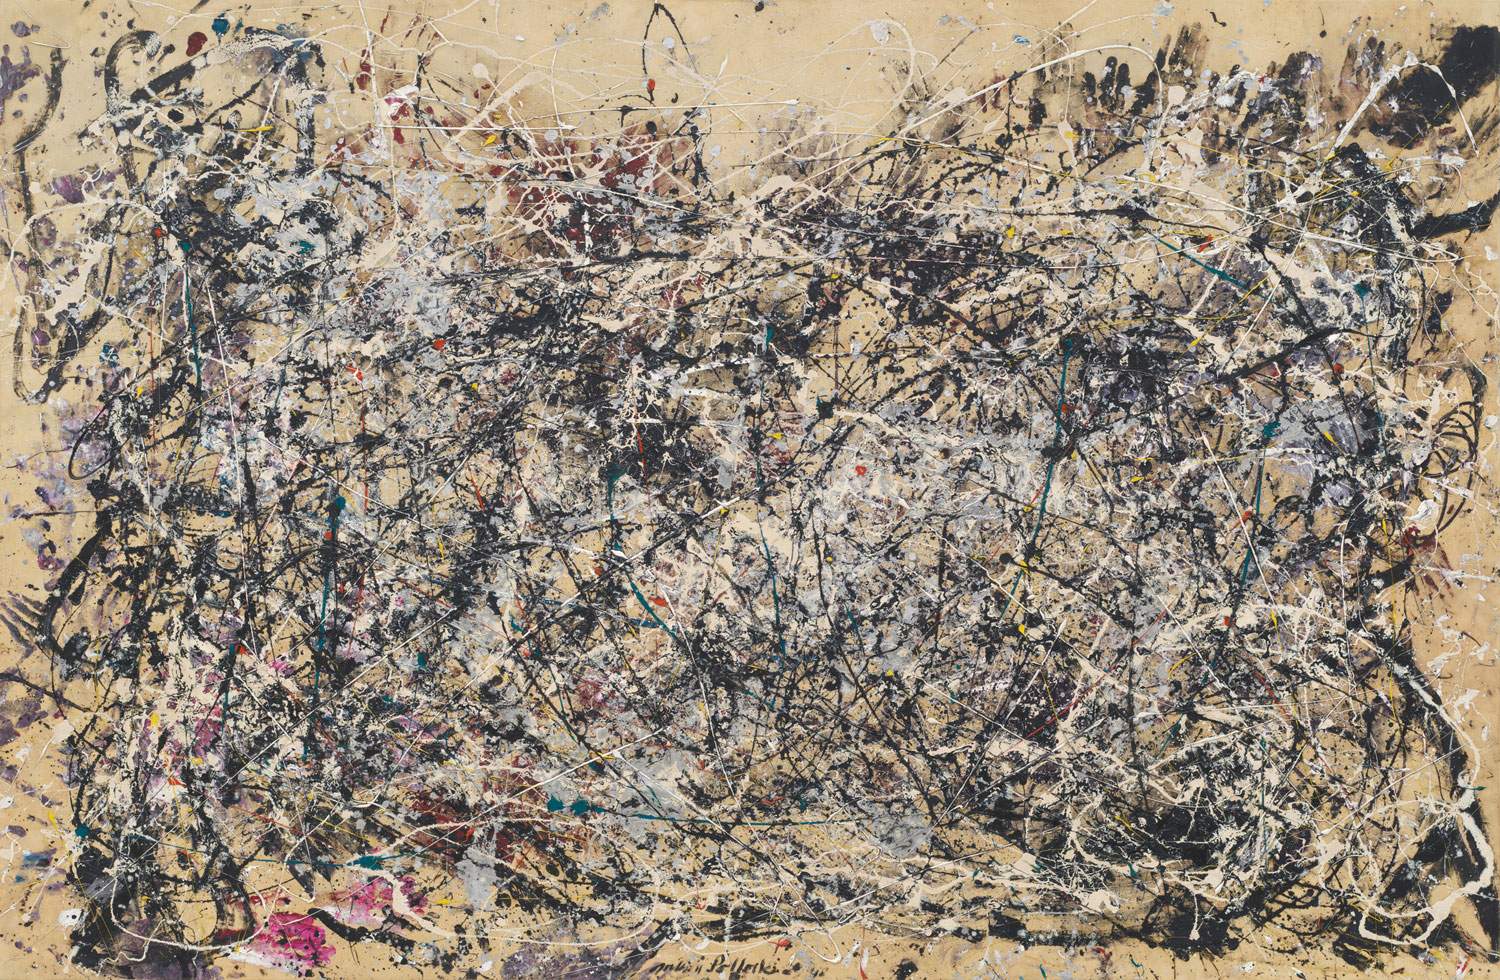 Jackson Pollock, life and works of the great abstract expressionist